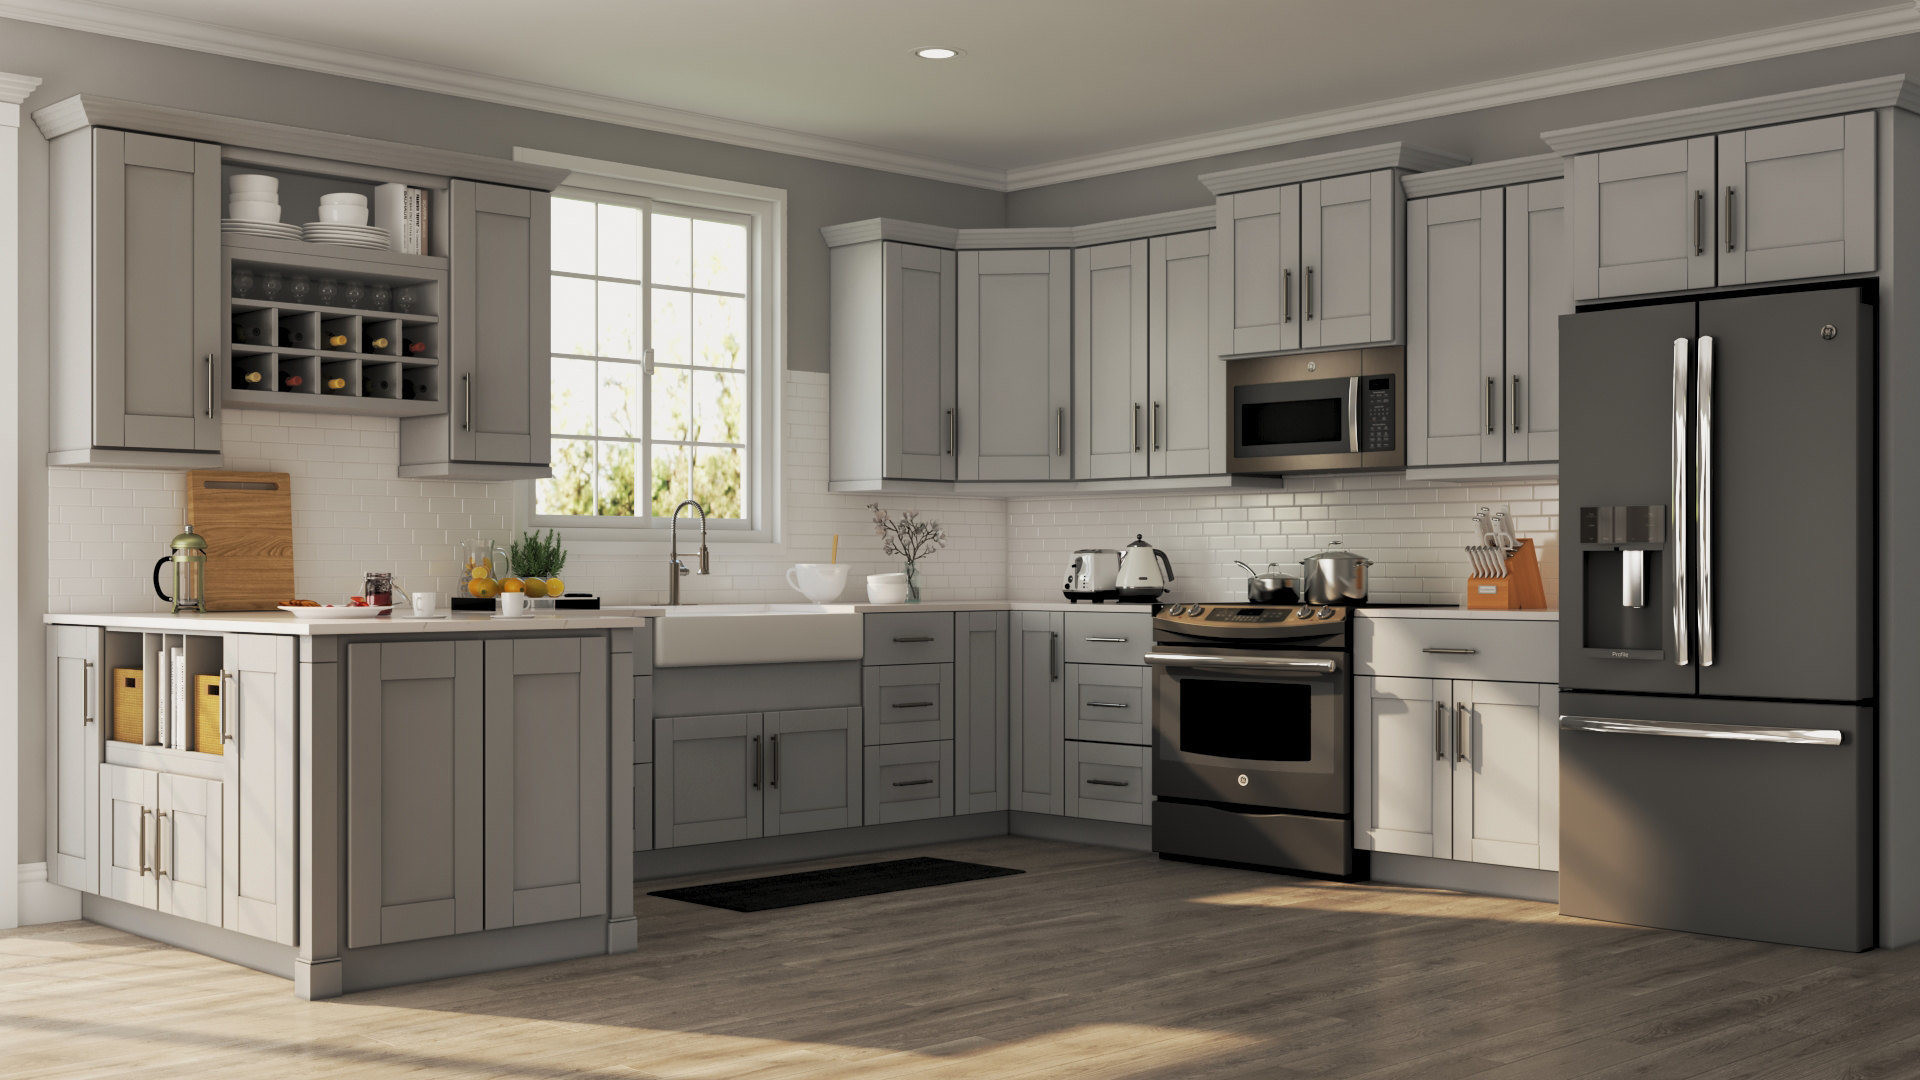 Kitchen Wall Units
 Shaker Wall Cabinets in Dove Gray – Kitchen – The Home Depot